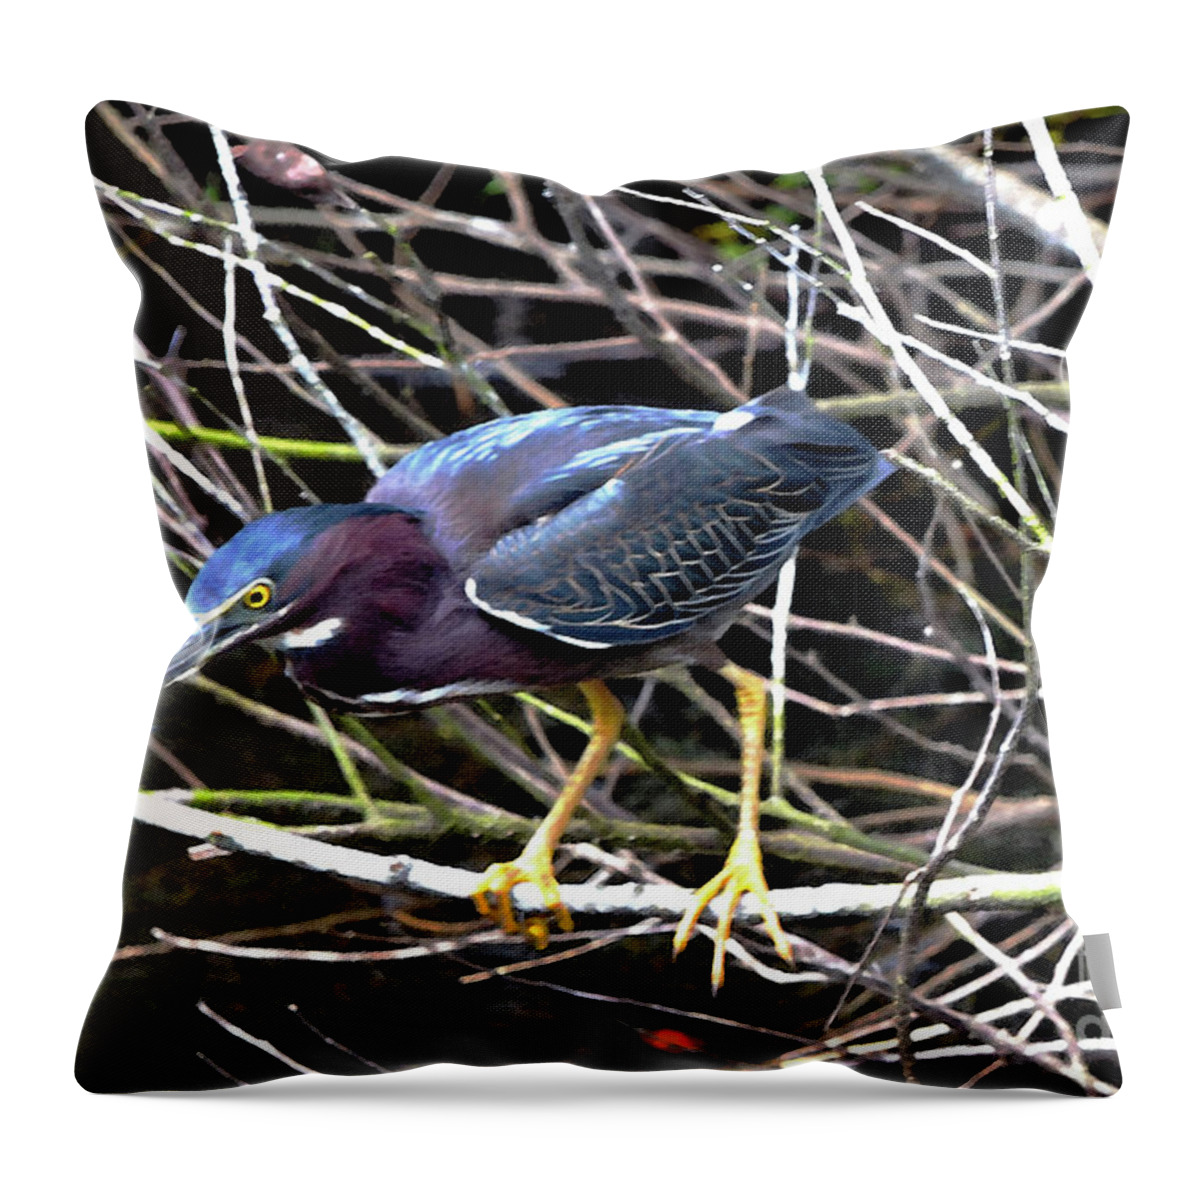 Green Heron Throw Pillow featuring the photograph Green Heron by Pravine Chester